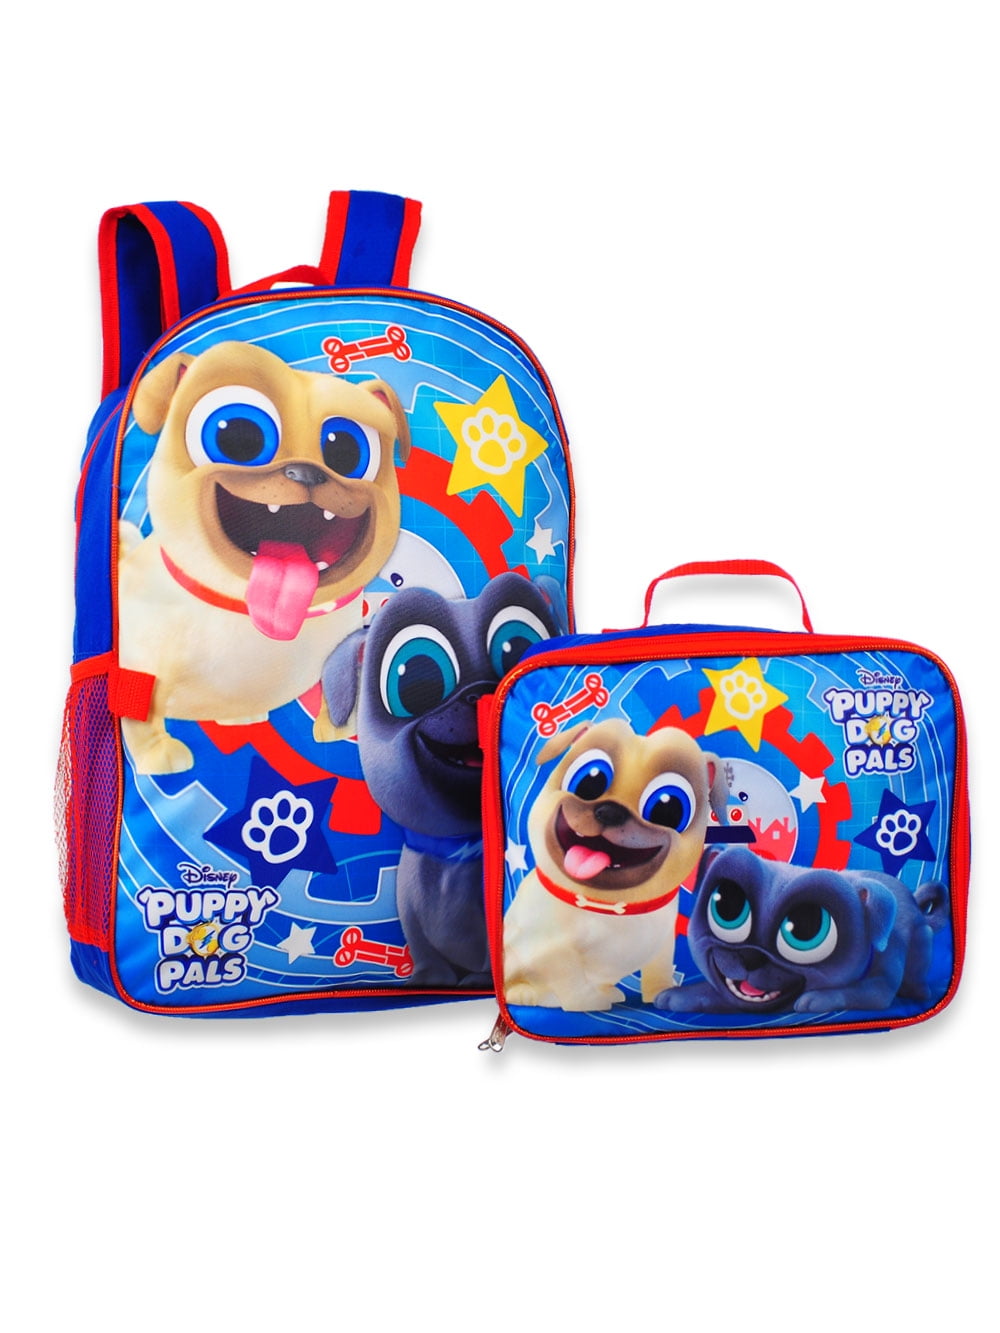 Disney Puppy Dog Pals Backpack with Lunchbox 